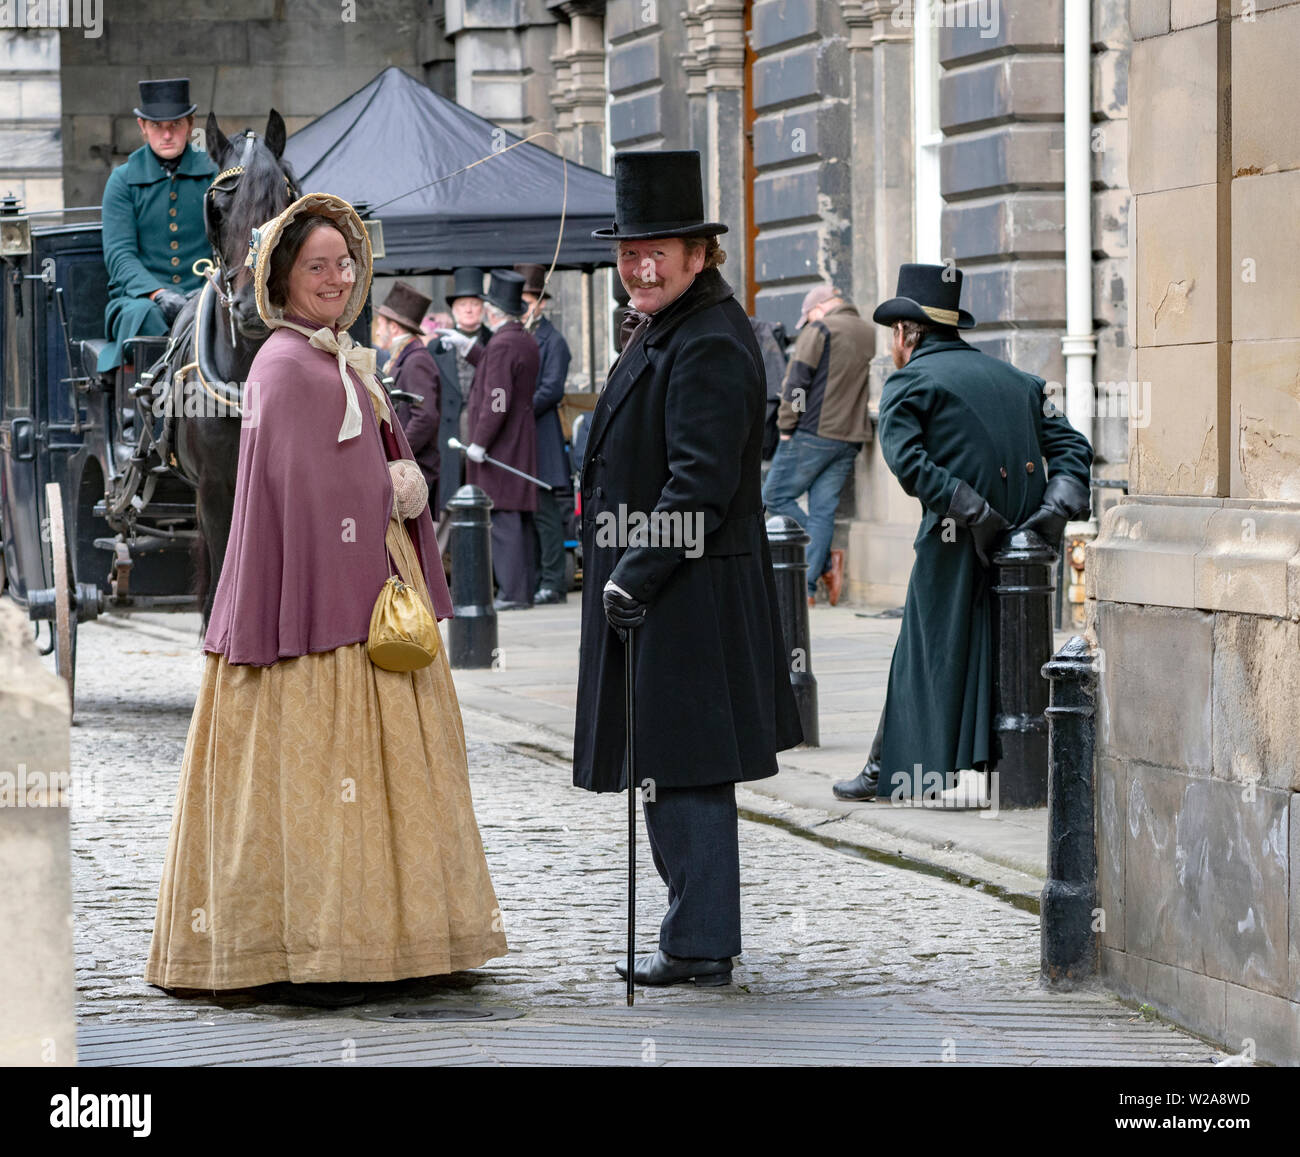 Filming in Edinburgh of Belgravia, an upcoming ITV historical period drama television series based on the novel of the same by Julian Fellowes. Stock Photo